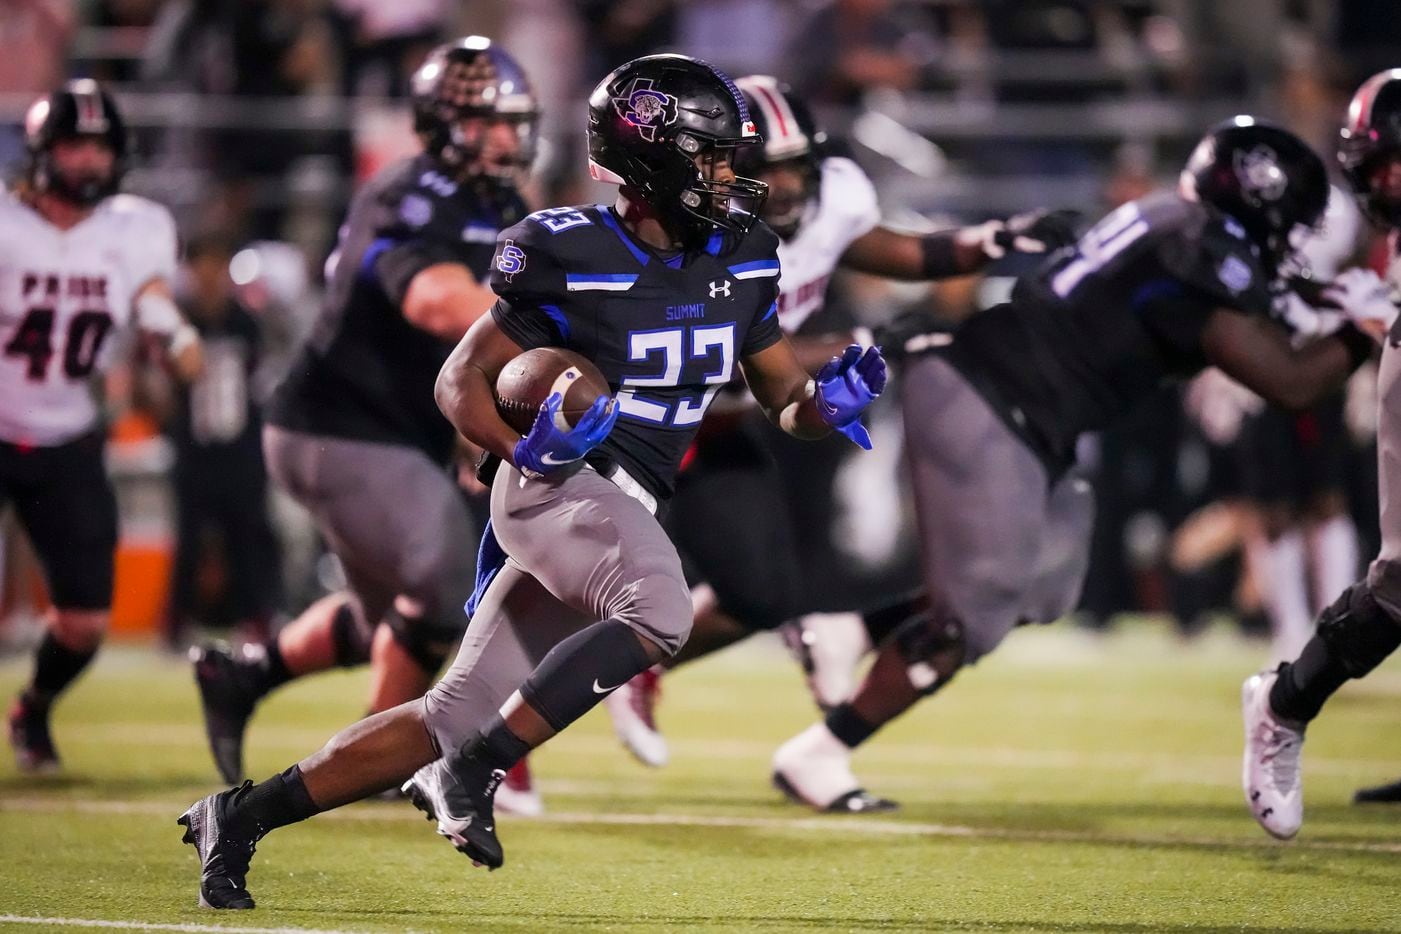 Mansfield Summit running back Orlando Scales (23) carries the ball during the second half of the Class 5A Division I Region I final against Colleyville Heritage on Friday, Dec. 3, 2021, in North Richland Hills, Texas. (Smiley N. Pool/The Dallas Morning News)